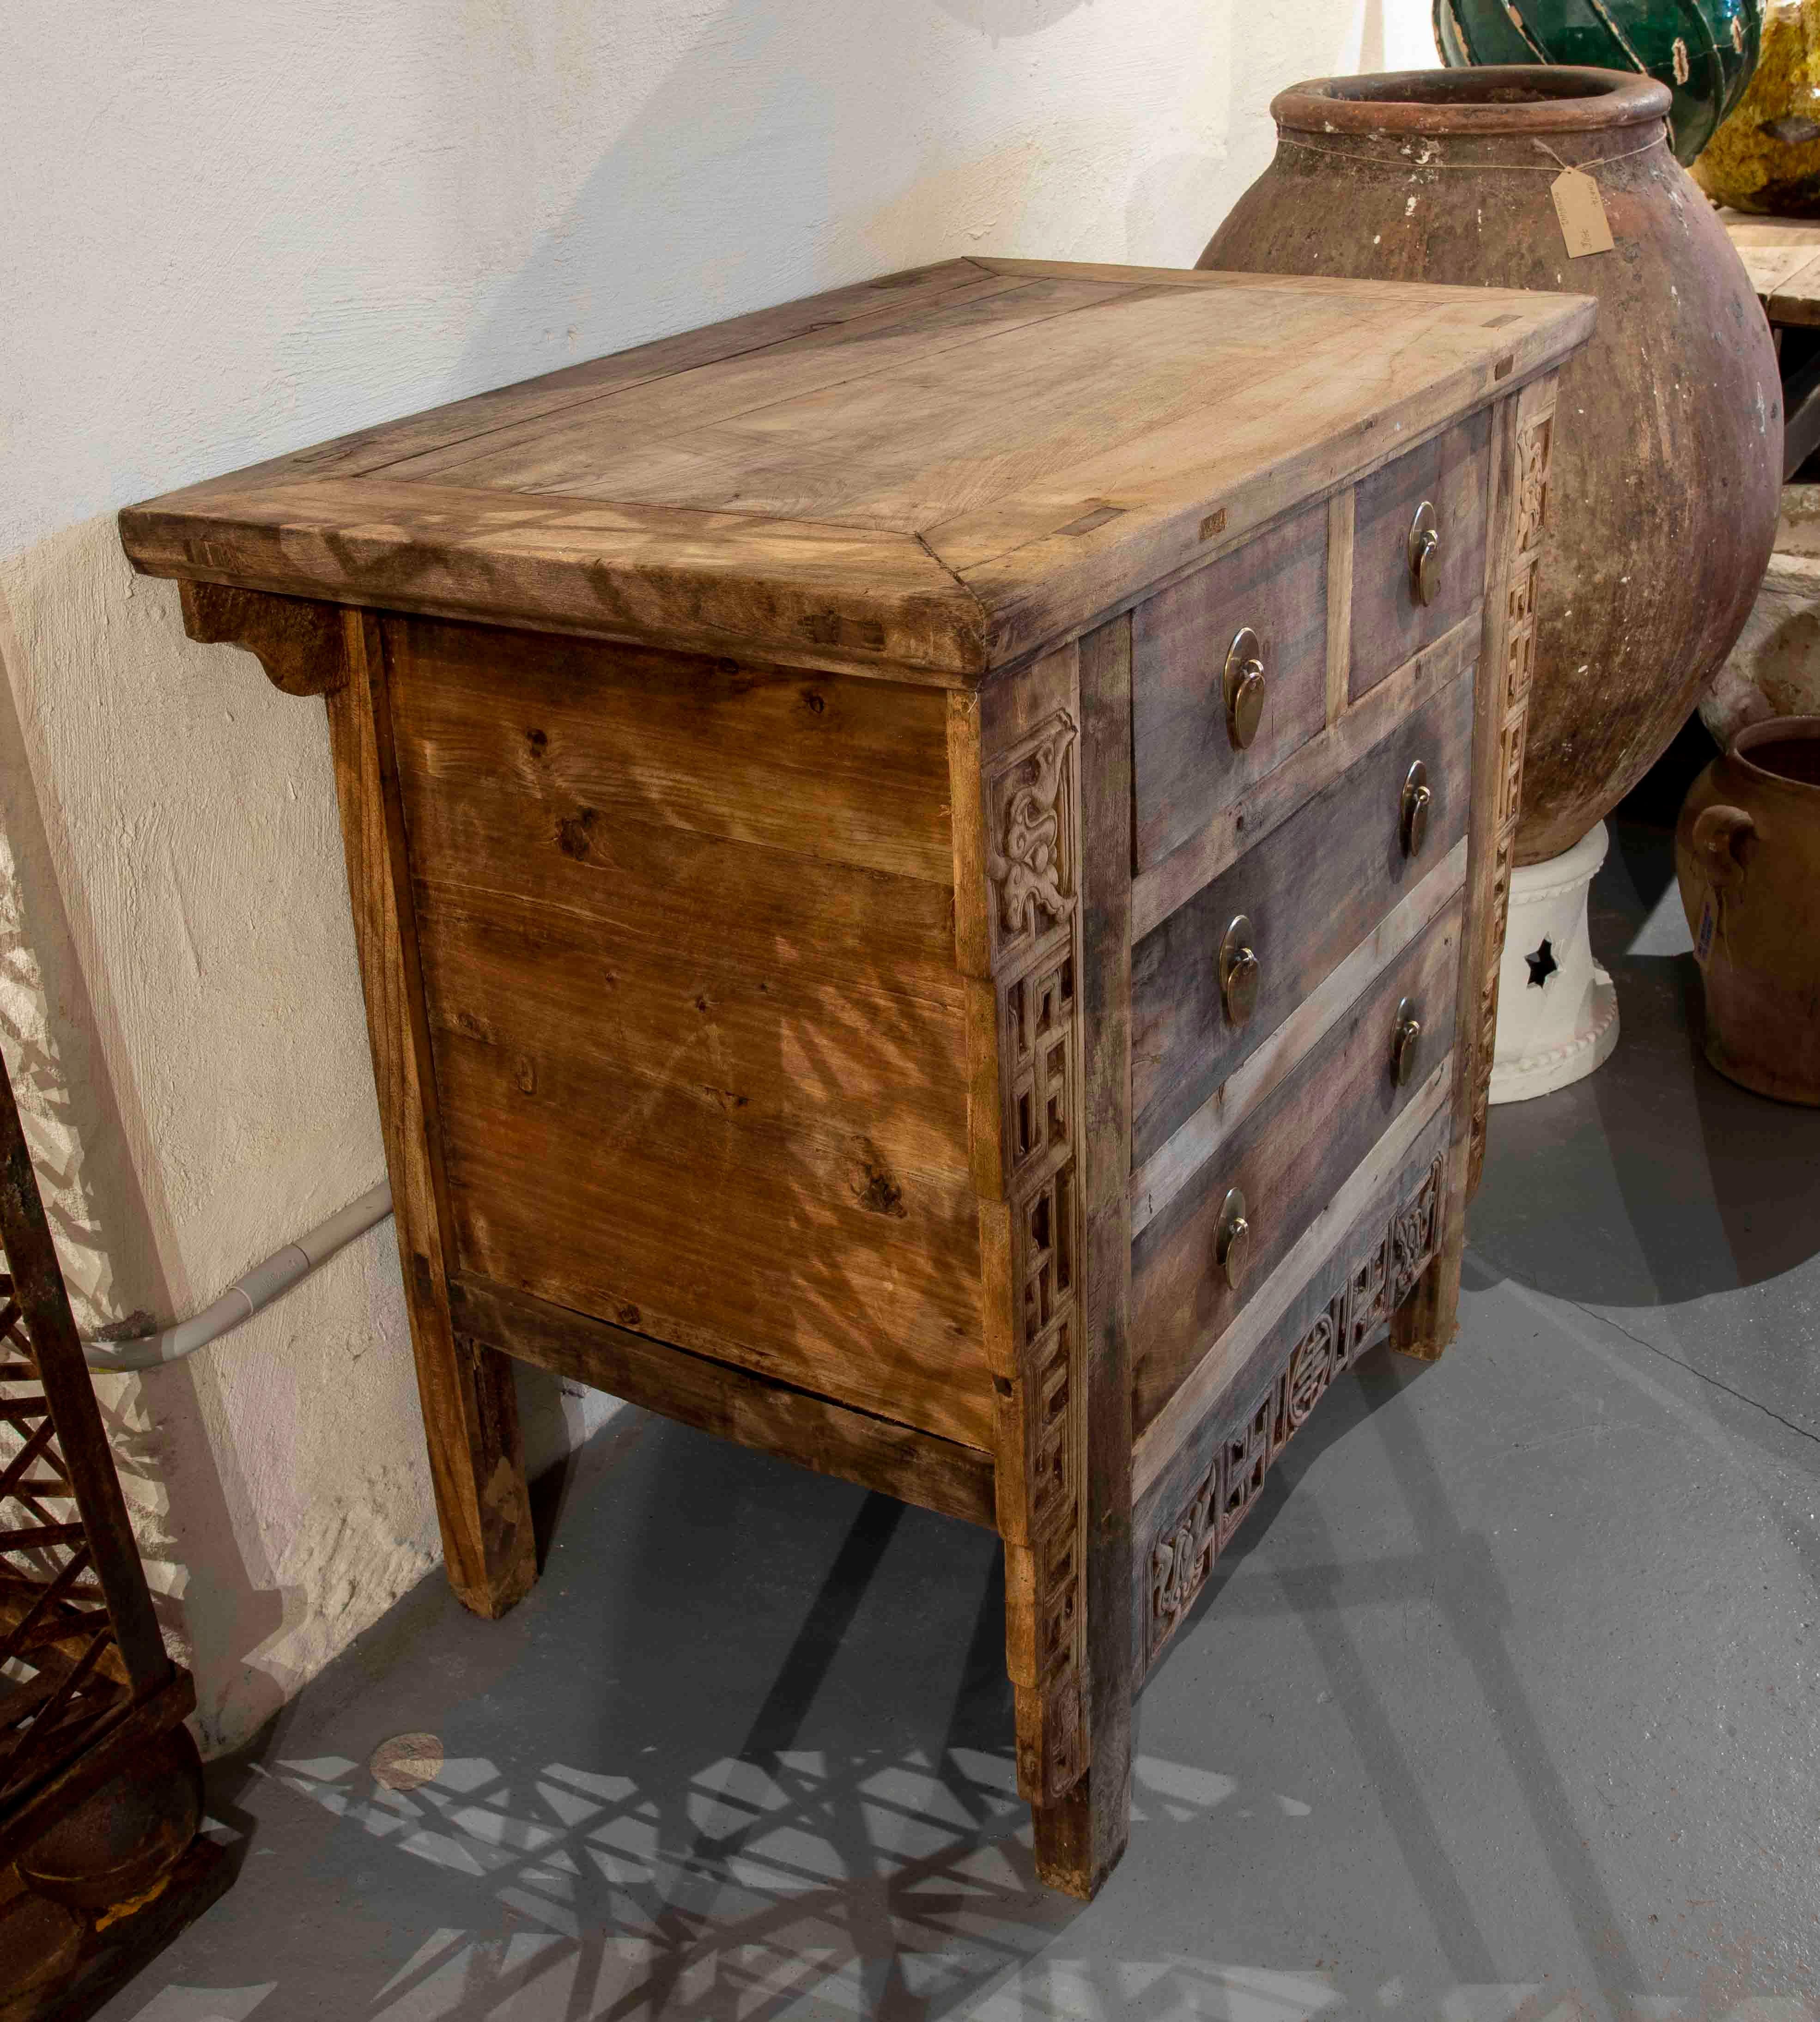 Oriental Chest with Elm Drawers in the Colour of the Wood with Bronze Pulls.